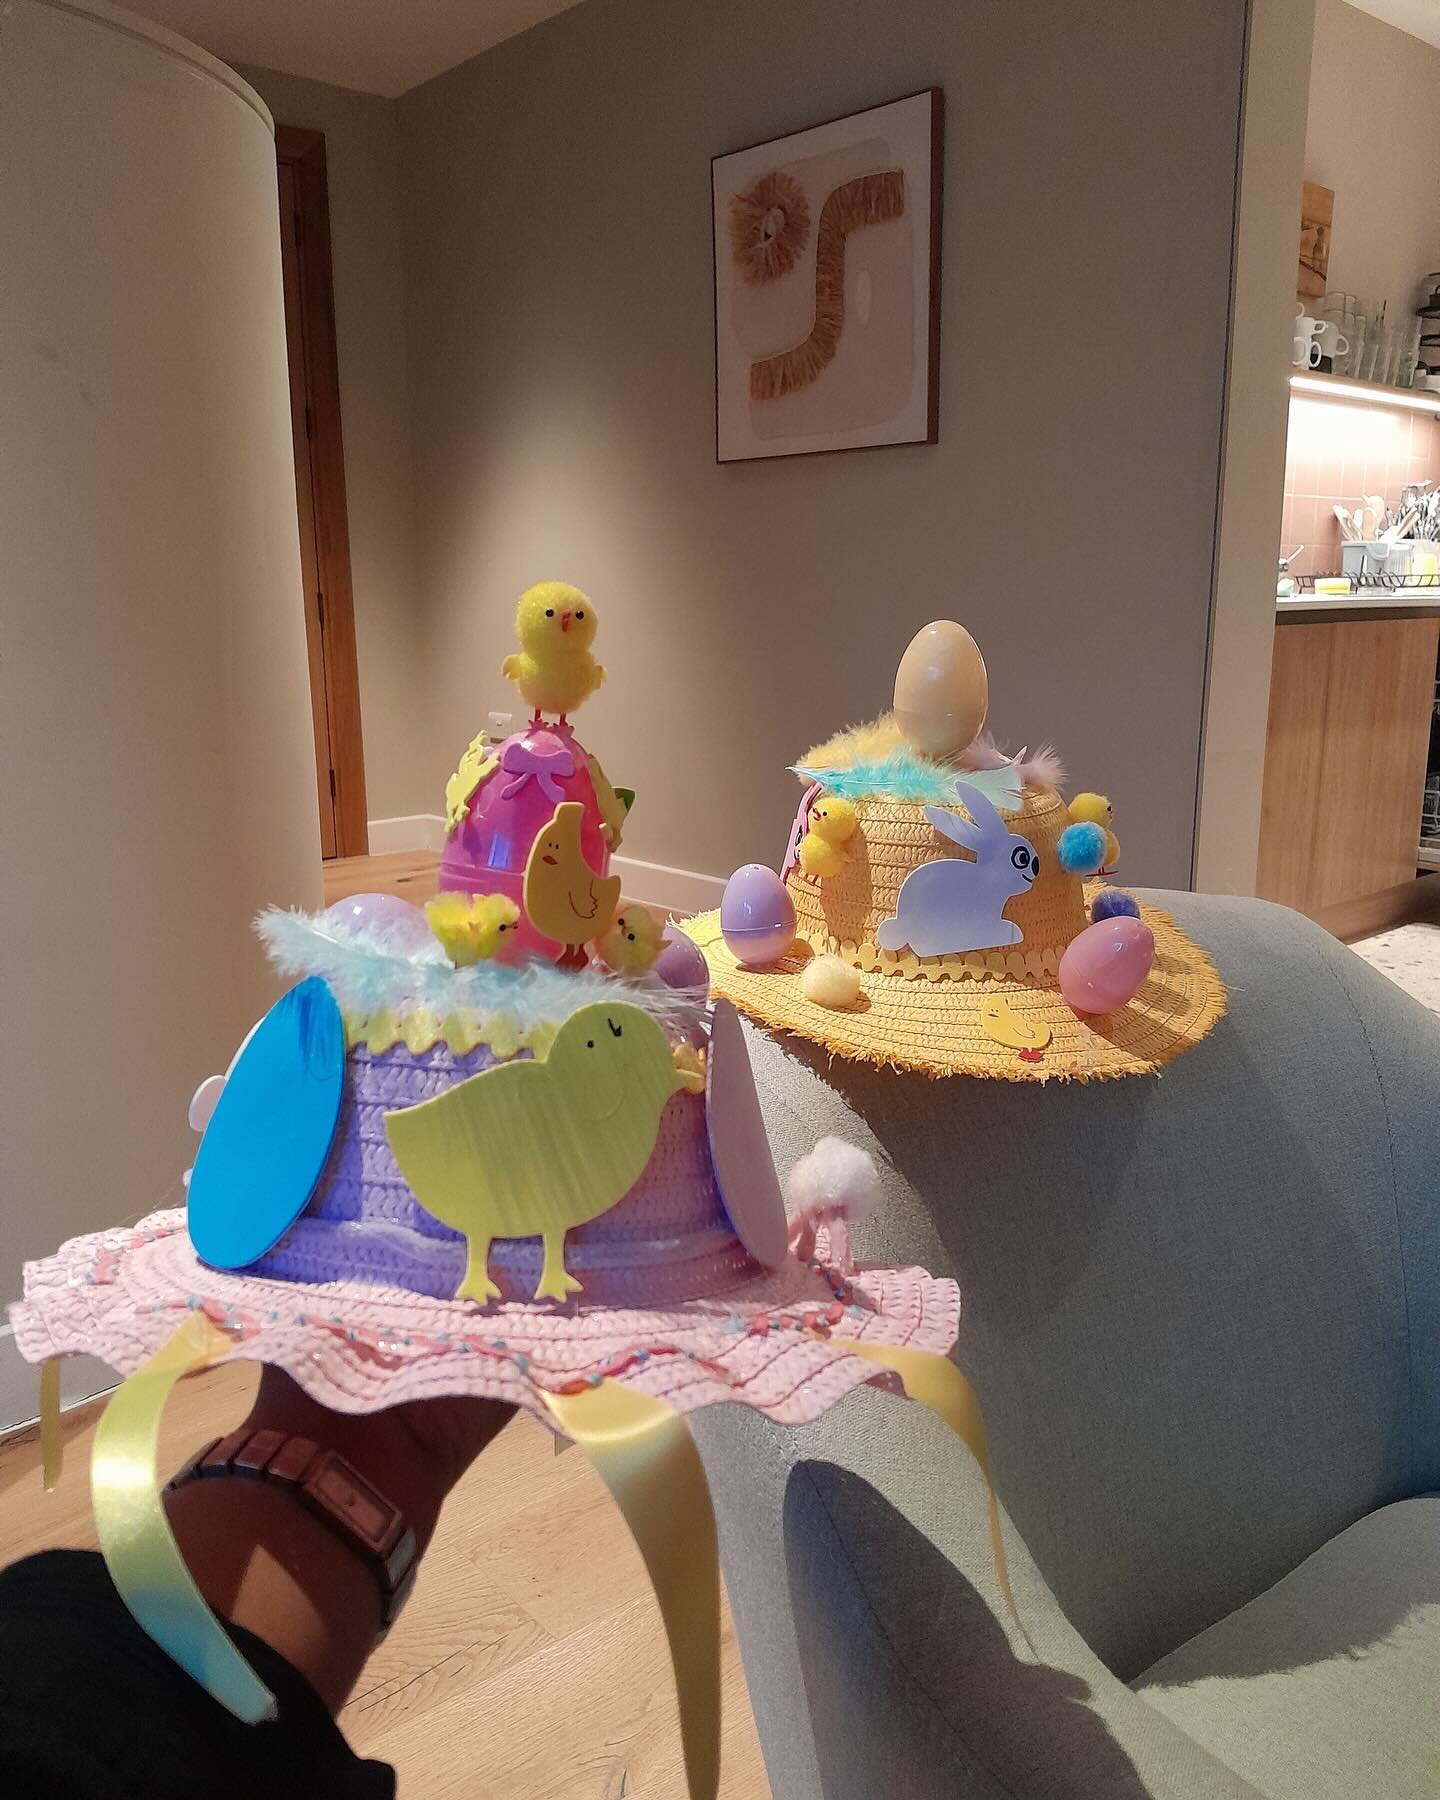 🐣🐣🐣Easter Bonnet making competition at Hope Street over the weekend. Beautiful entries from women and their children!🐰🌞🌷🌿

#Easterbonnet #artsandcrafts #Spring #Easter #HopeStreet #ostredesigningjustice